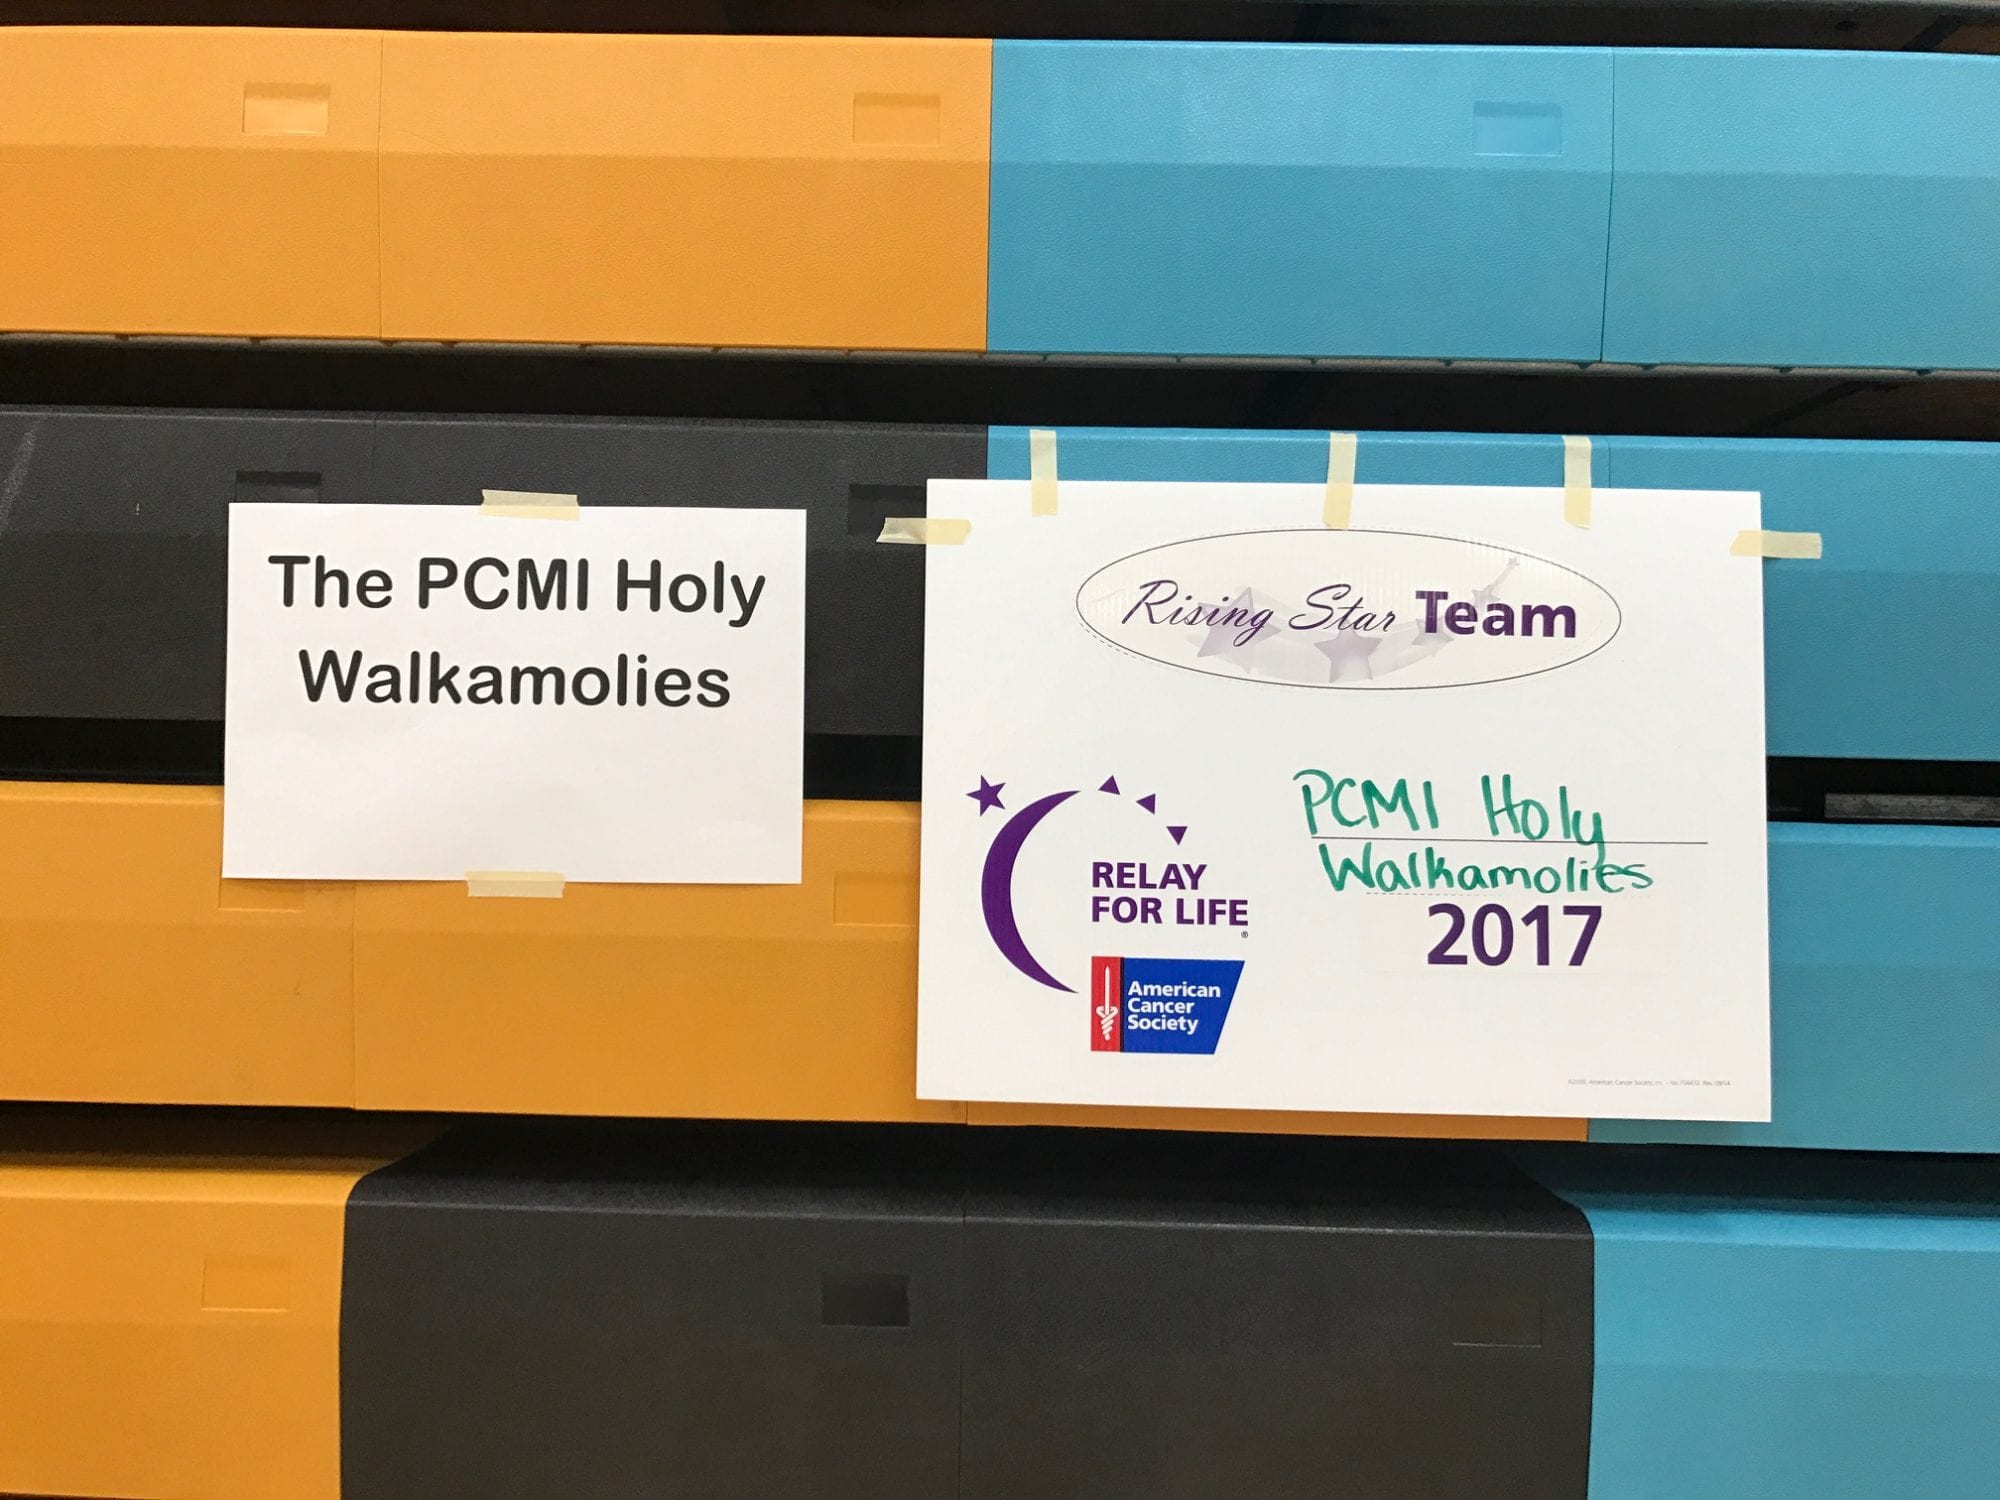 PCMI Gives Back to the Community by Participating in Relay for Life